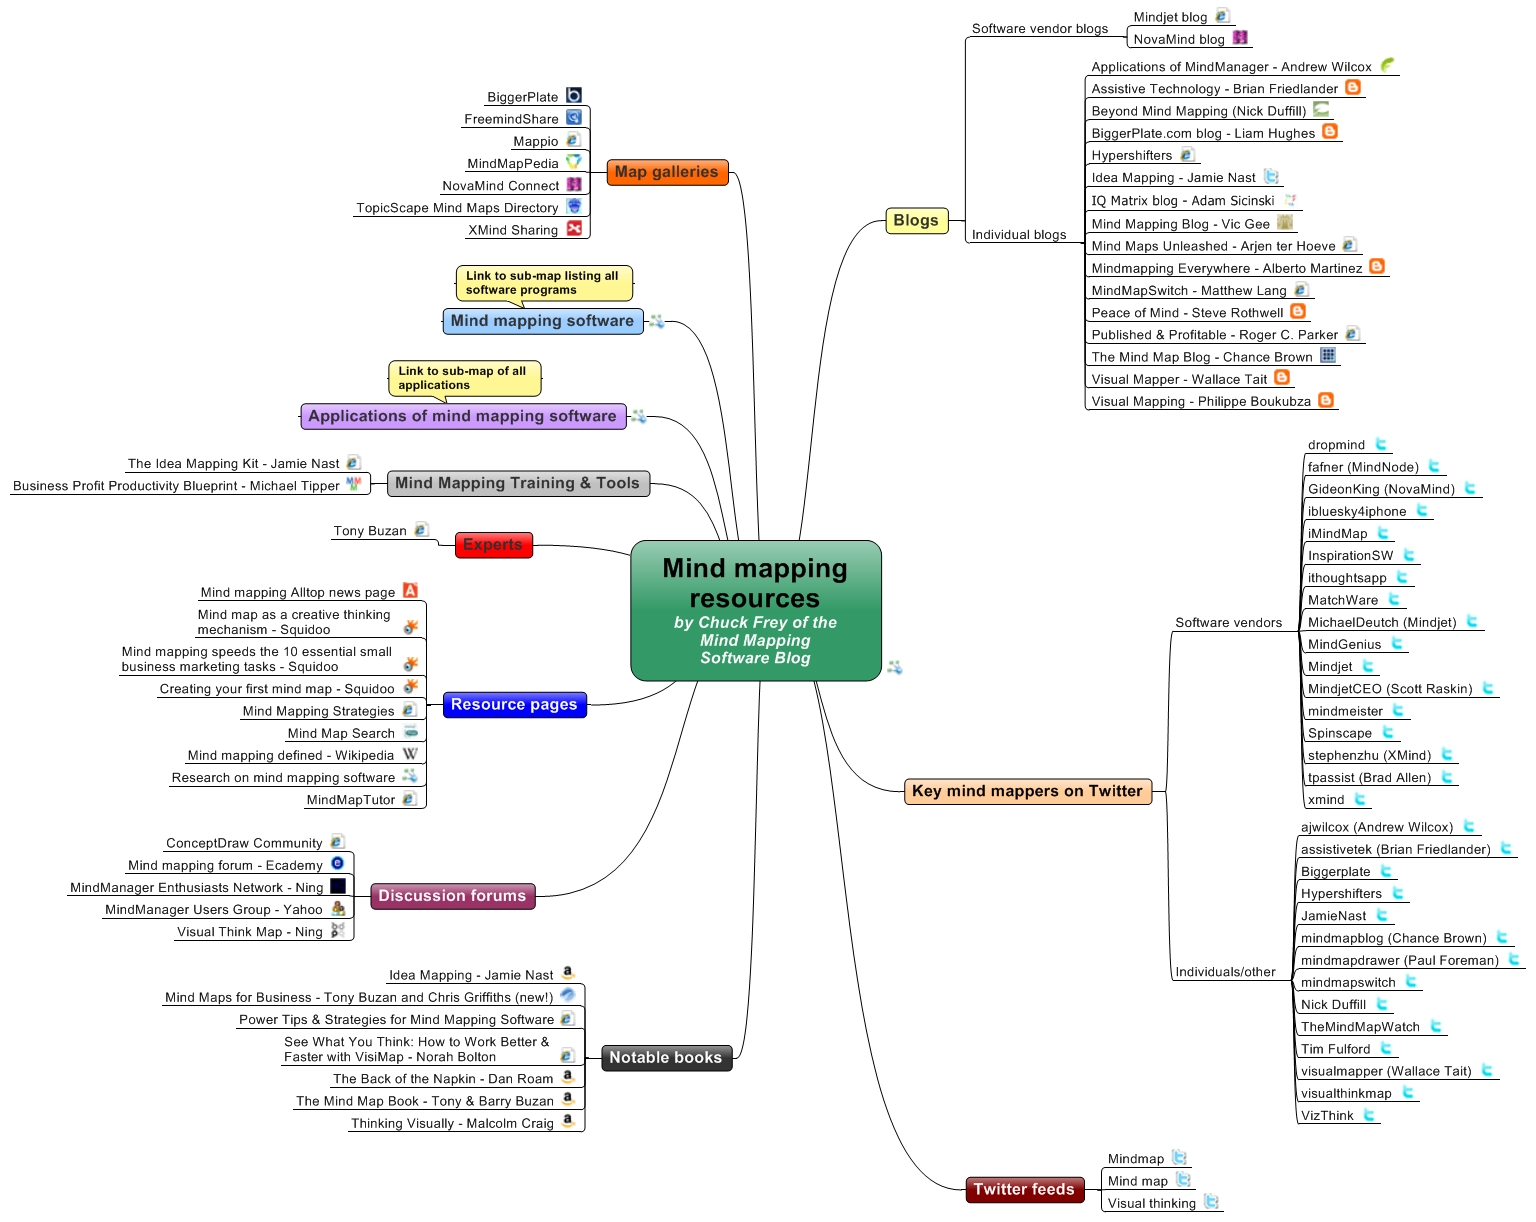 Mind mapping resources by Chuck Frey of the Mind Mapping Software Blog